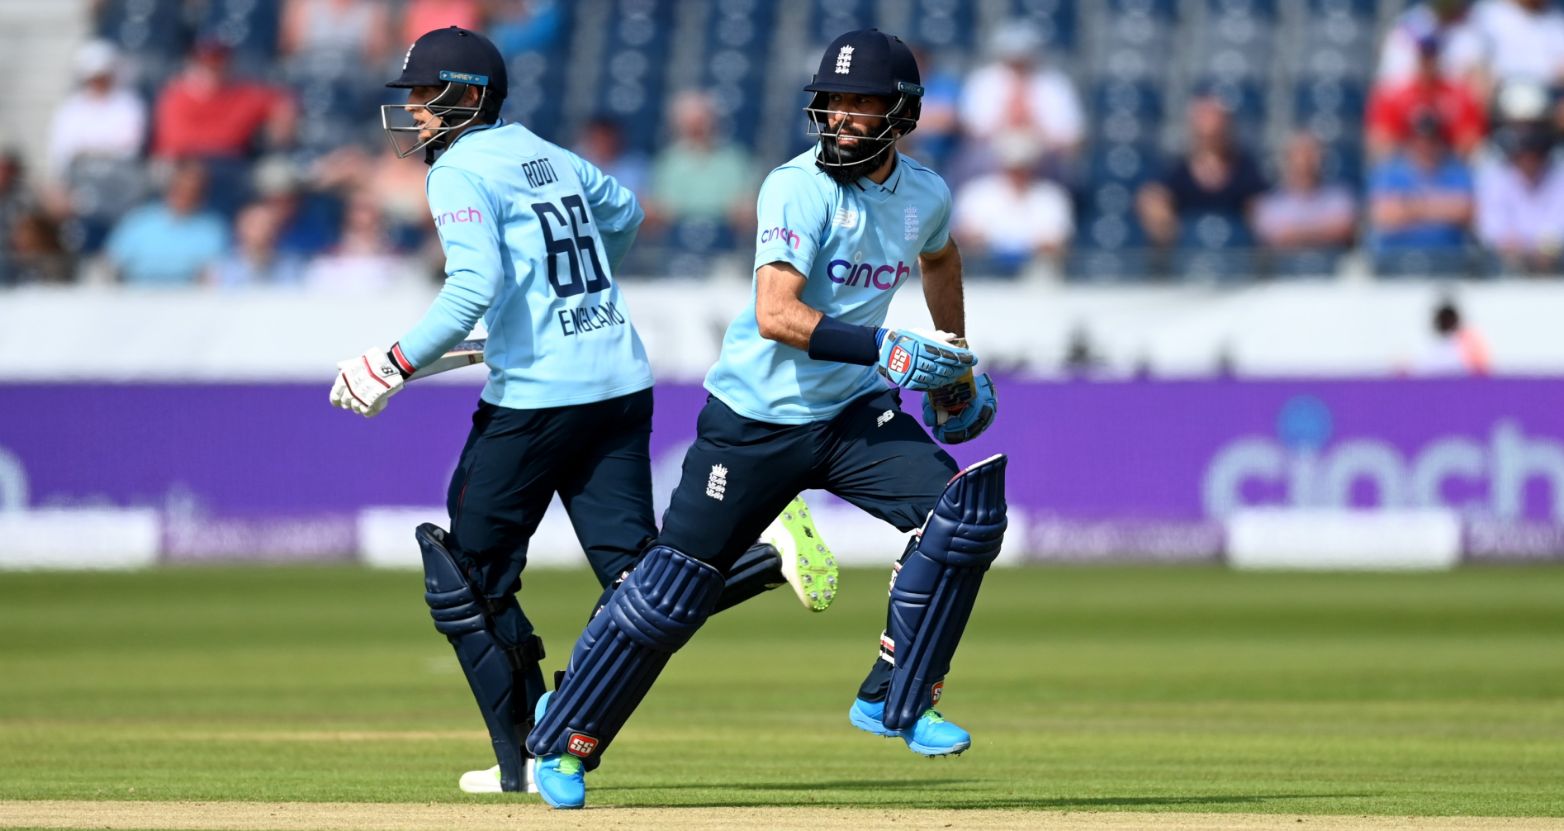 ENG vs SL | 1st ODI: Steady Joe Root denies exciting Lankan fast bowling to take England 1-0 up